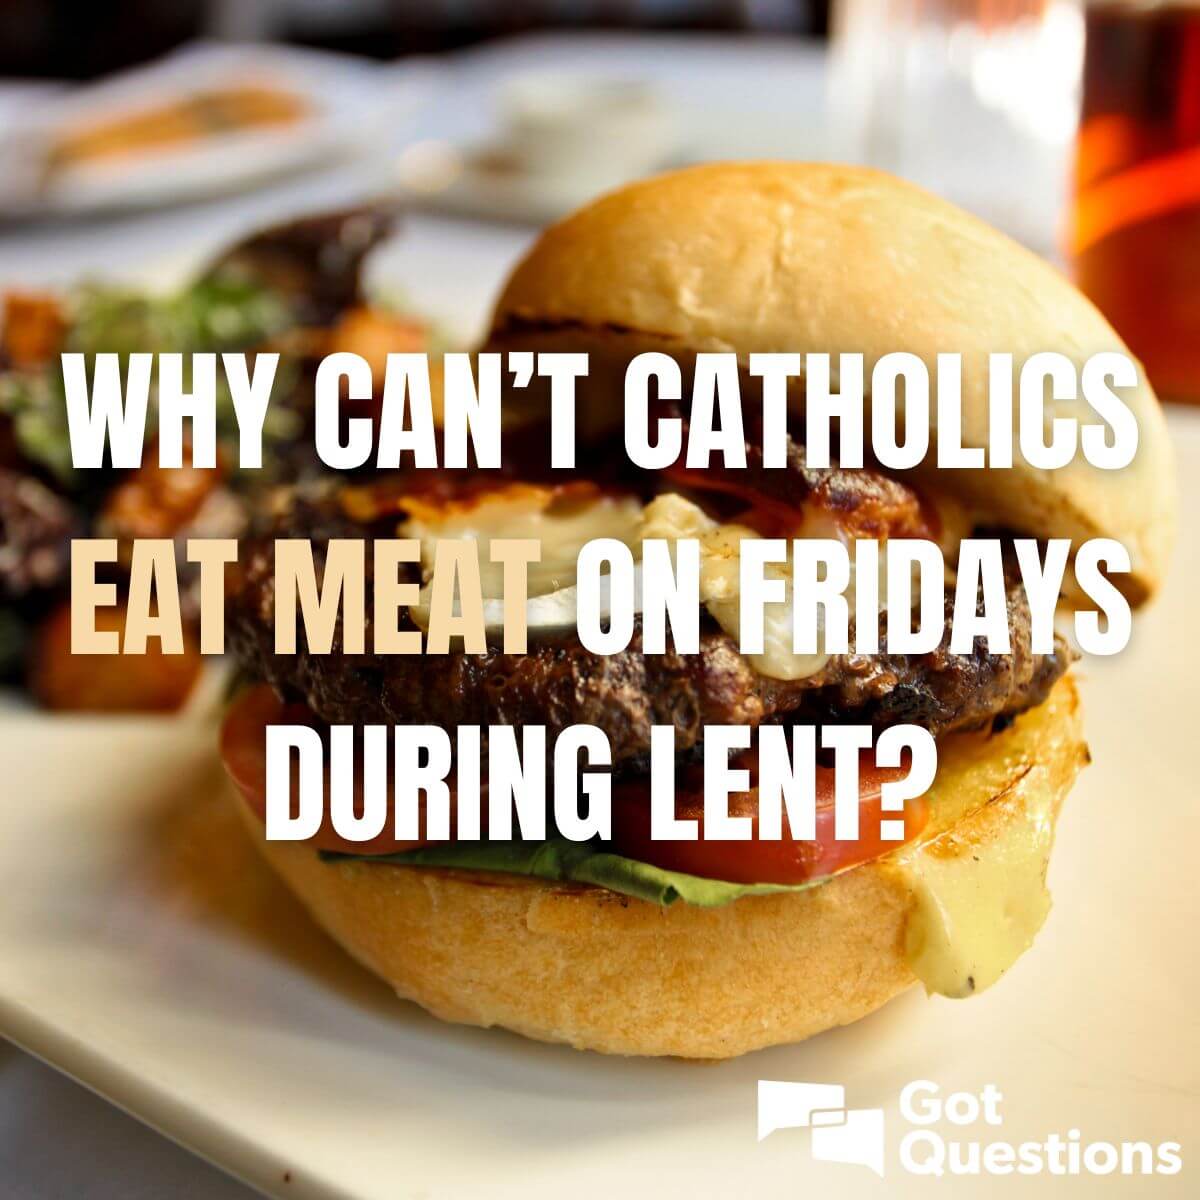 Is it a sin to eat meat on Fridays?